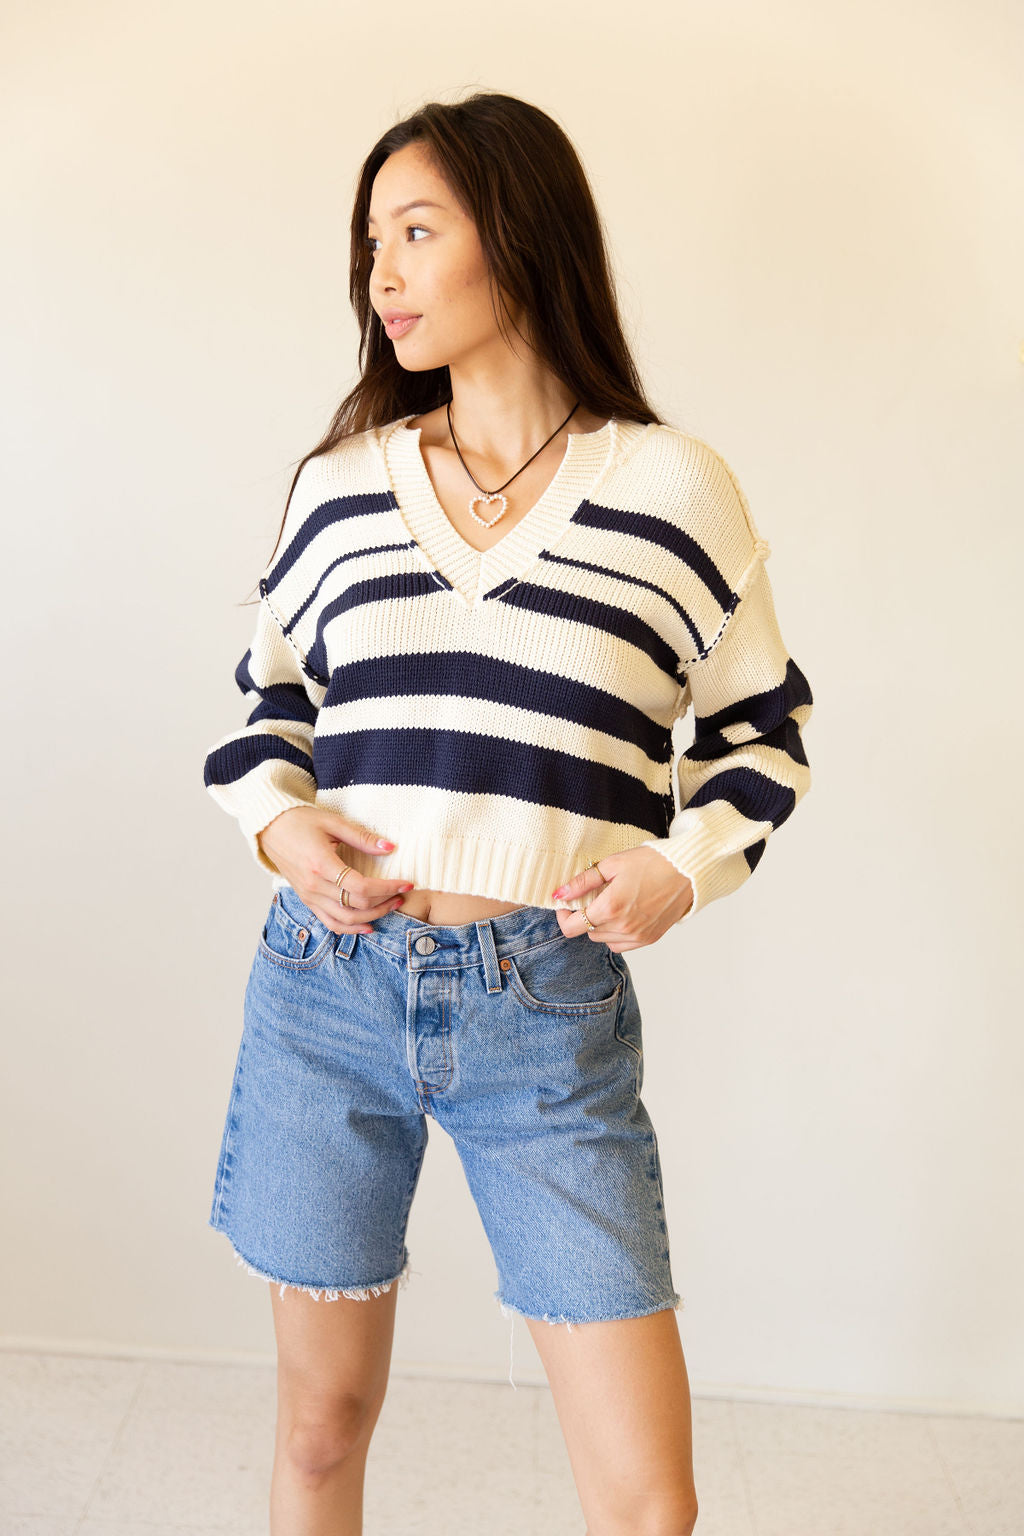 This Time Crochet Crop Sweater